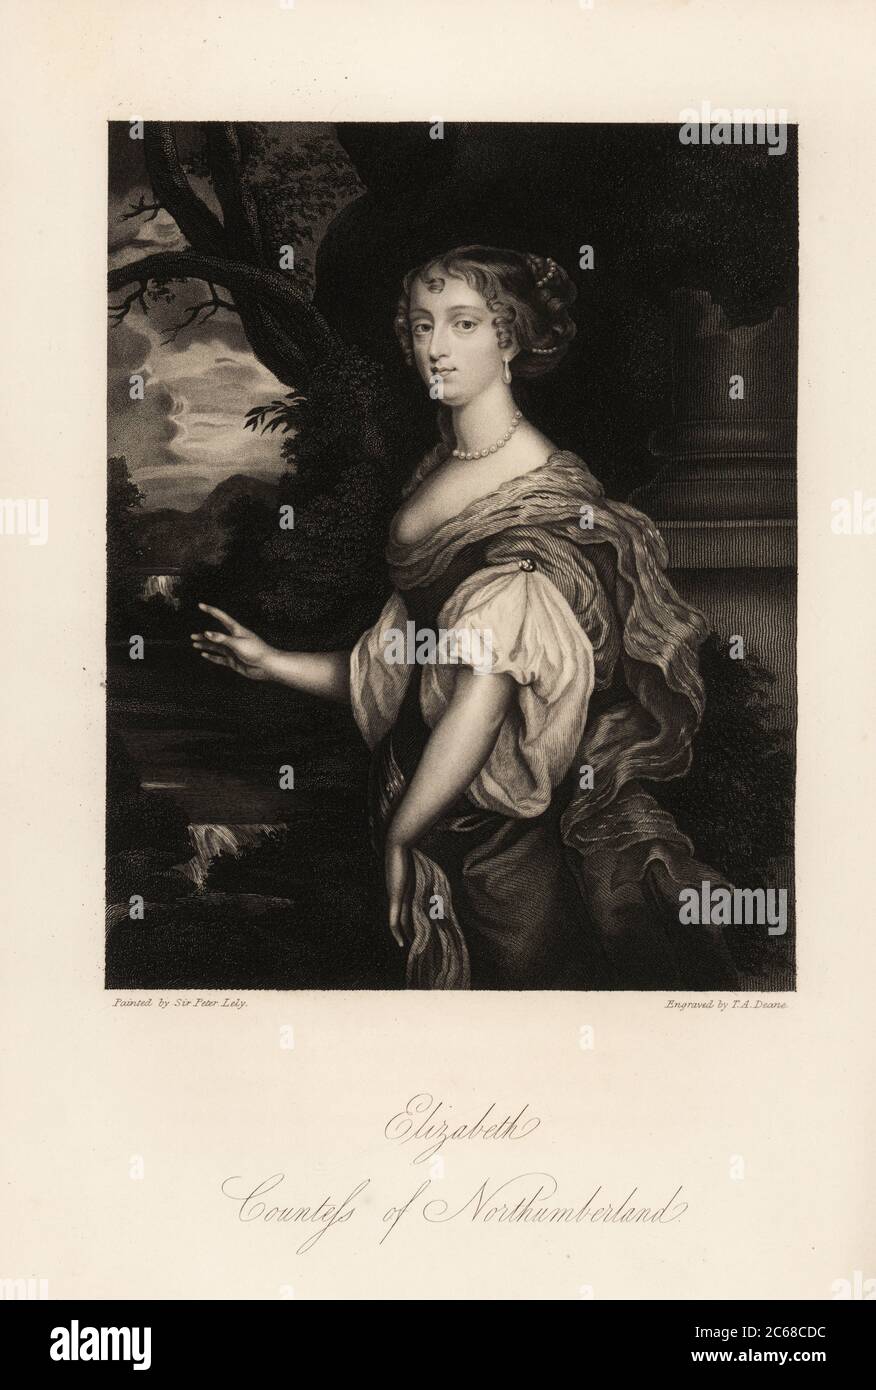 Portrait of Elizabeth Percy, Countess of Northumberland, wife to Joceline Percy, one of the Windsor Beauties,  1646-1690. Steel engraving by Thomas Anthony Deane after a portrait by Sir Peter Lely from Mrs Anna Jameson’s Memoirs of the Beauties of the Court of King Charles the Second, Henry Coburn, London, 1838 Stock Photo